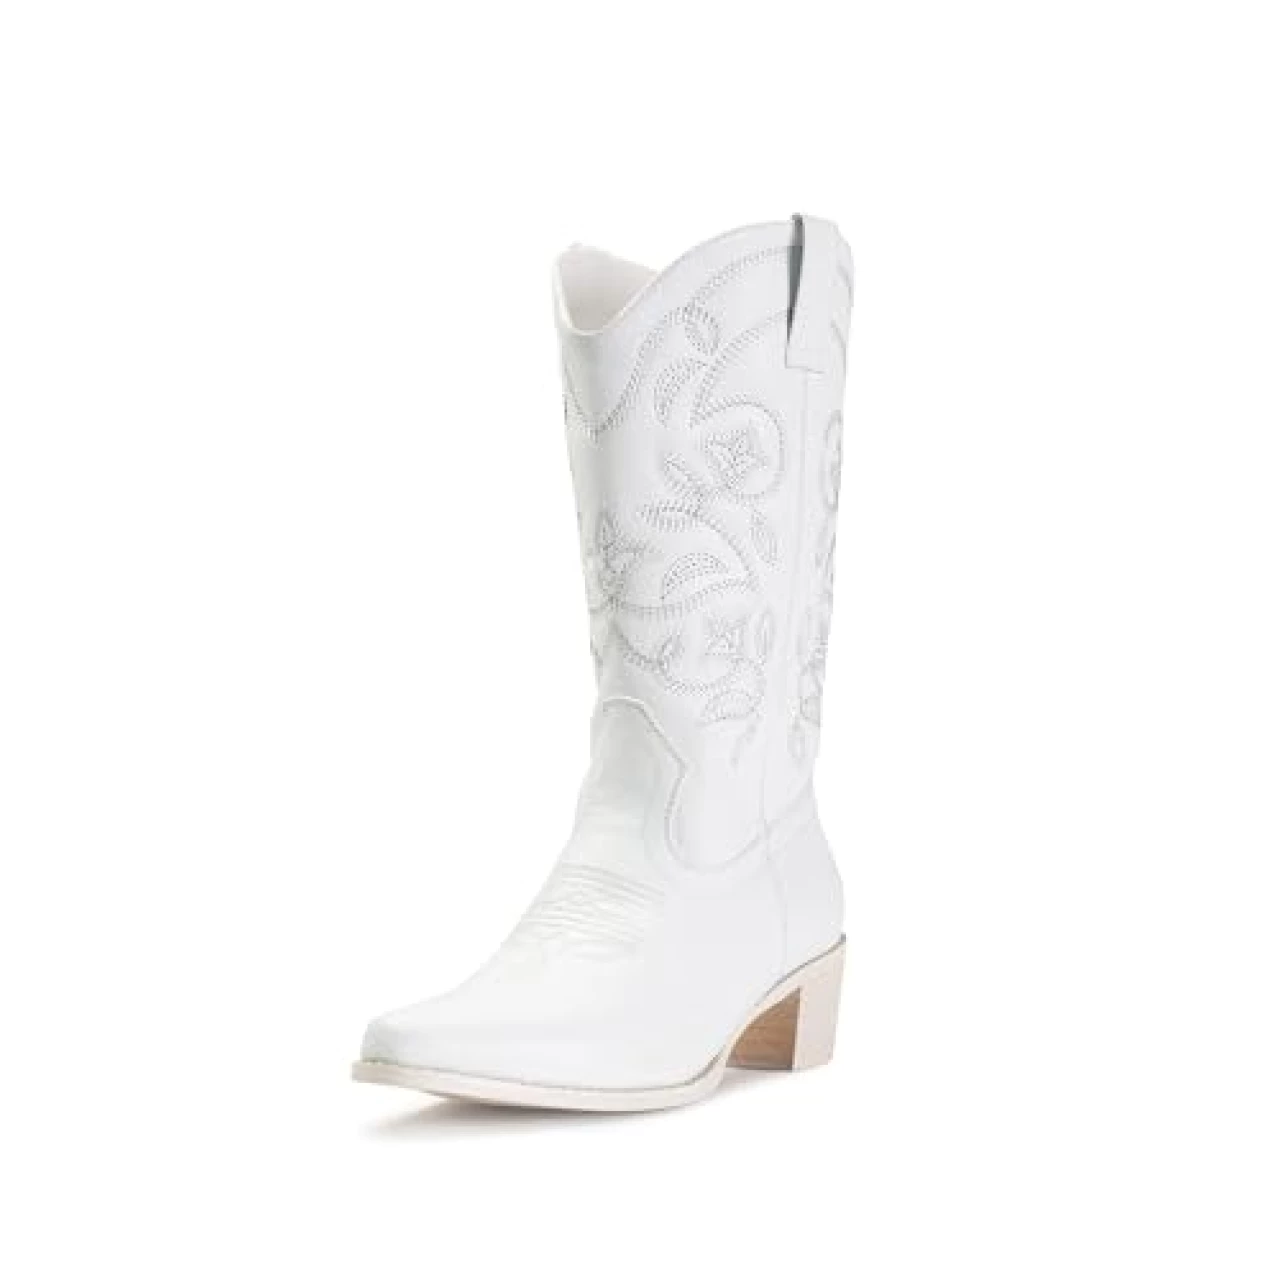 IUV Cowboy Boots For Women Pointy Toe Women&rsquo;s Western Boots Cowgirl Boots Mid Calf Boots